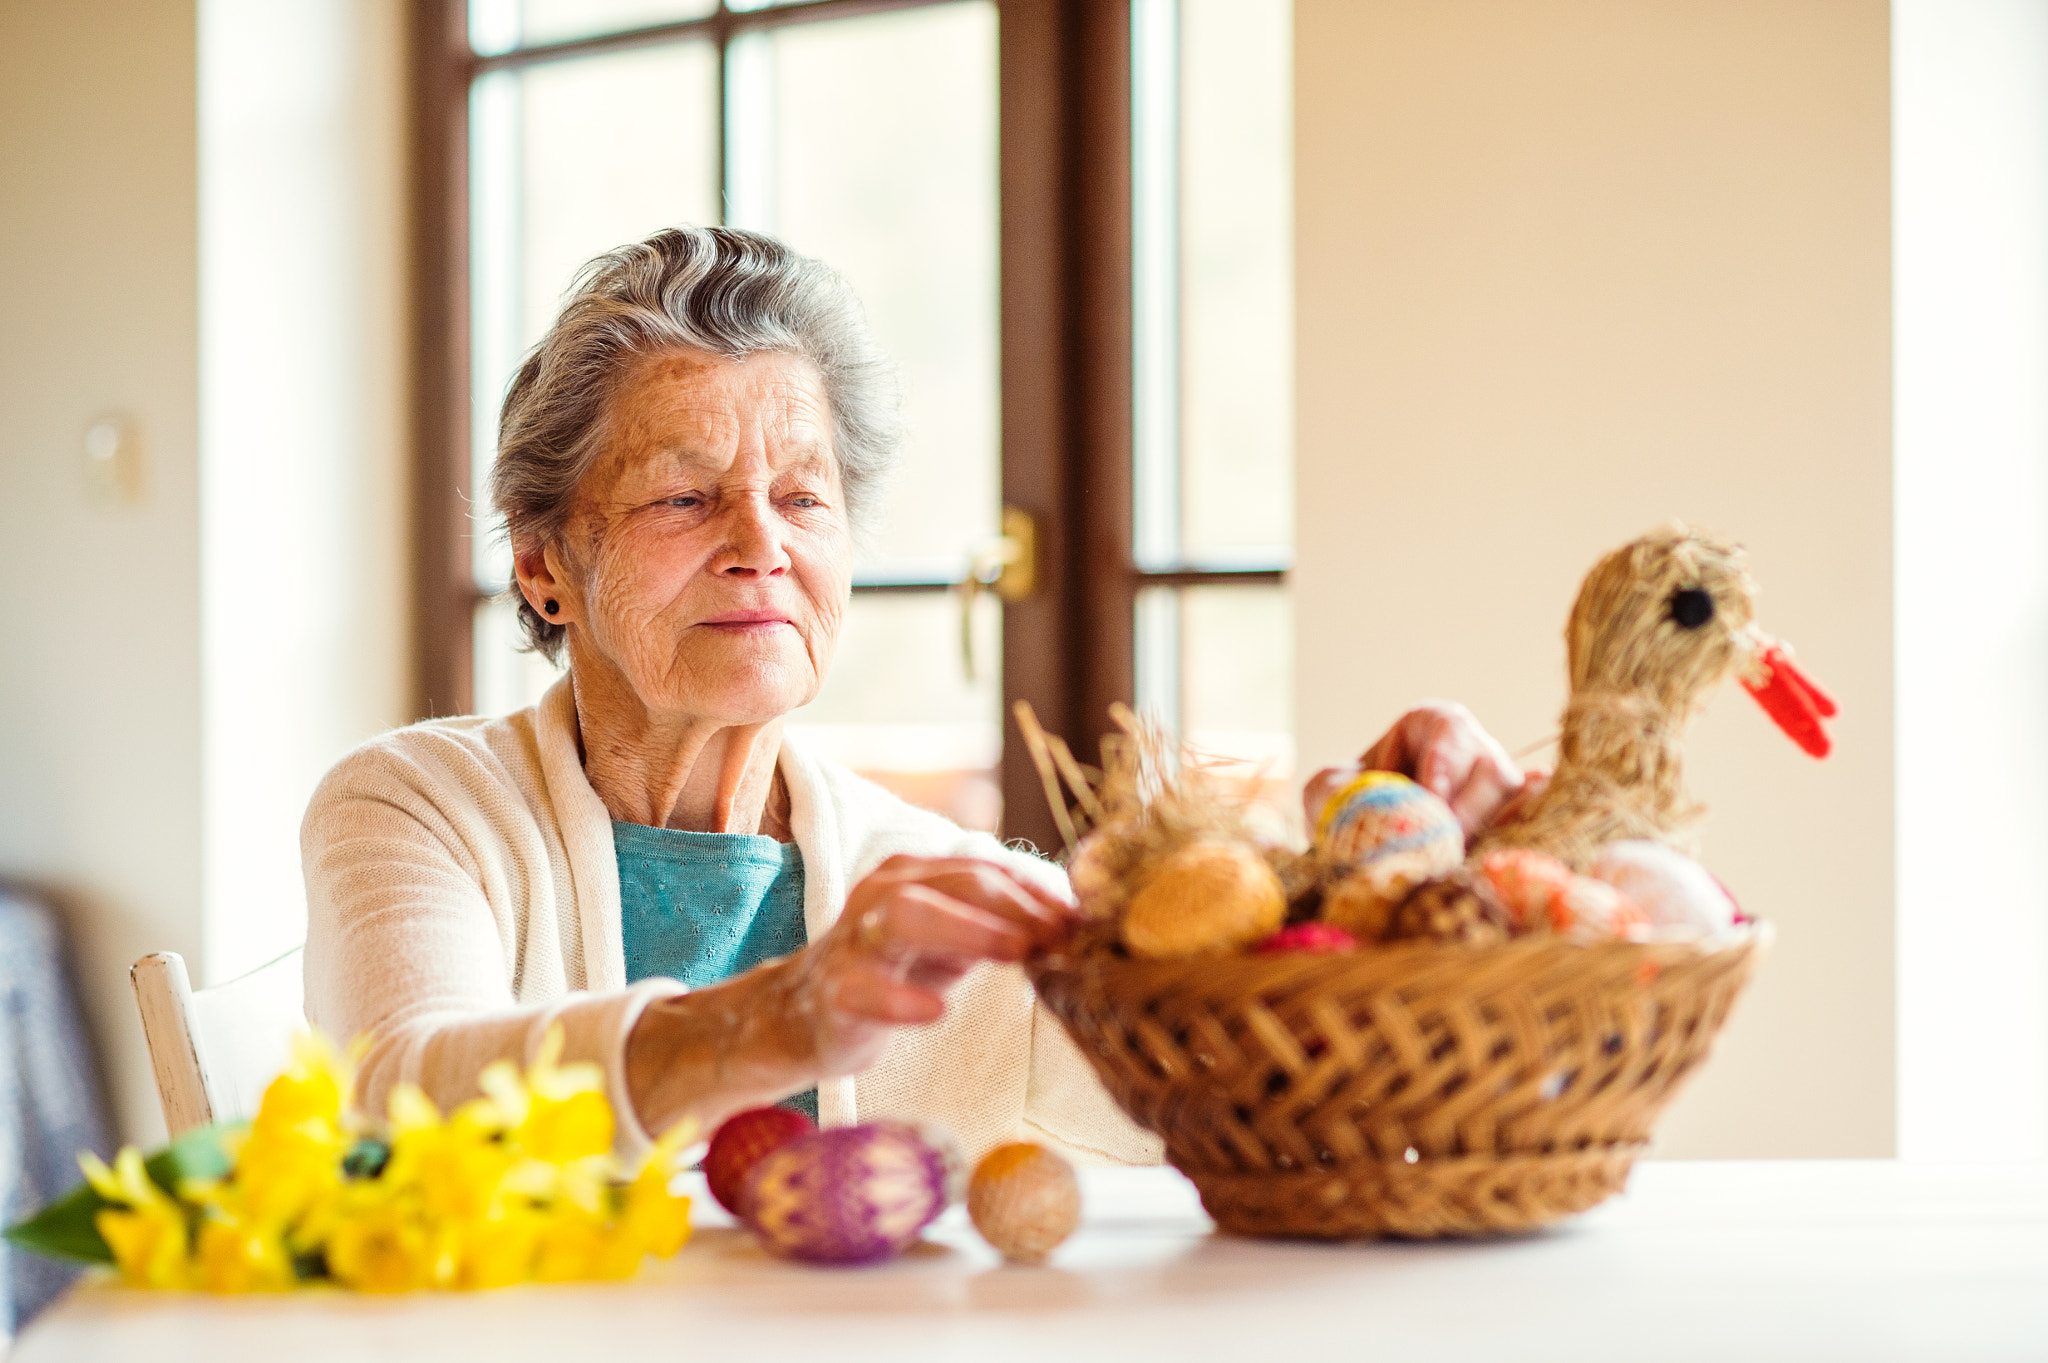 Nikon D4S sample photo. Senior woman arranging basket with easter eggs and daffodils photography